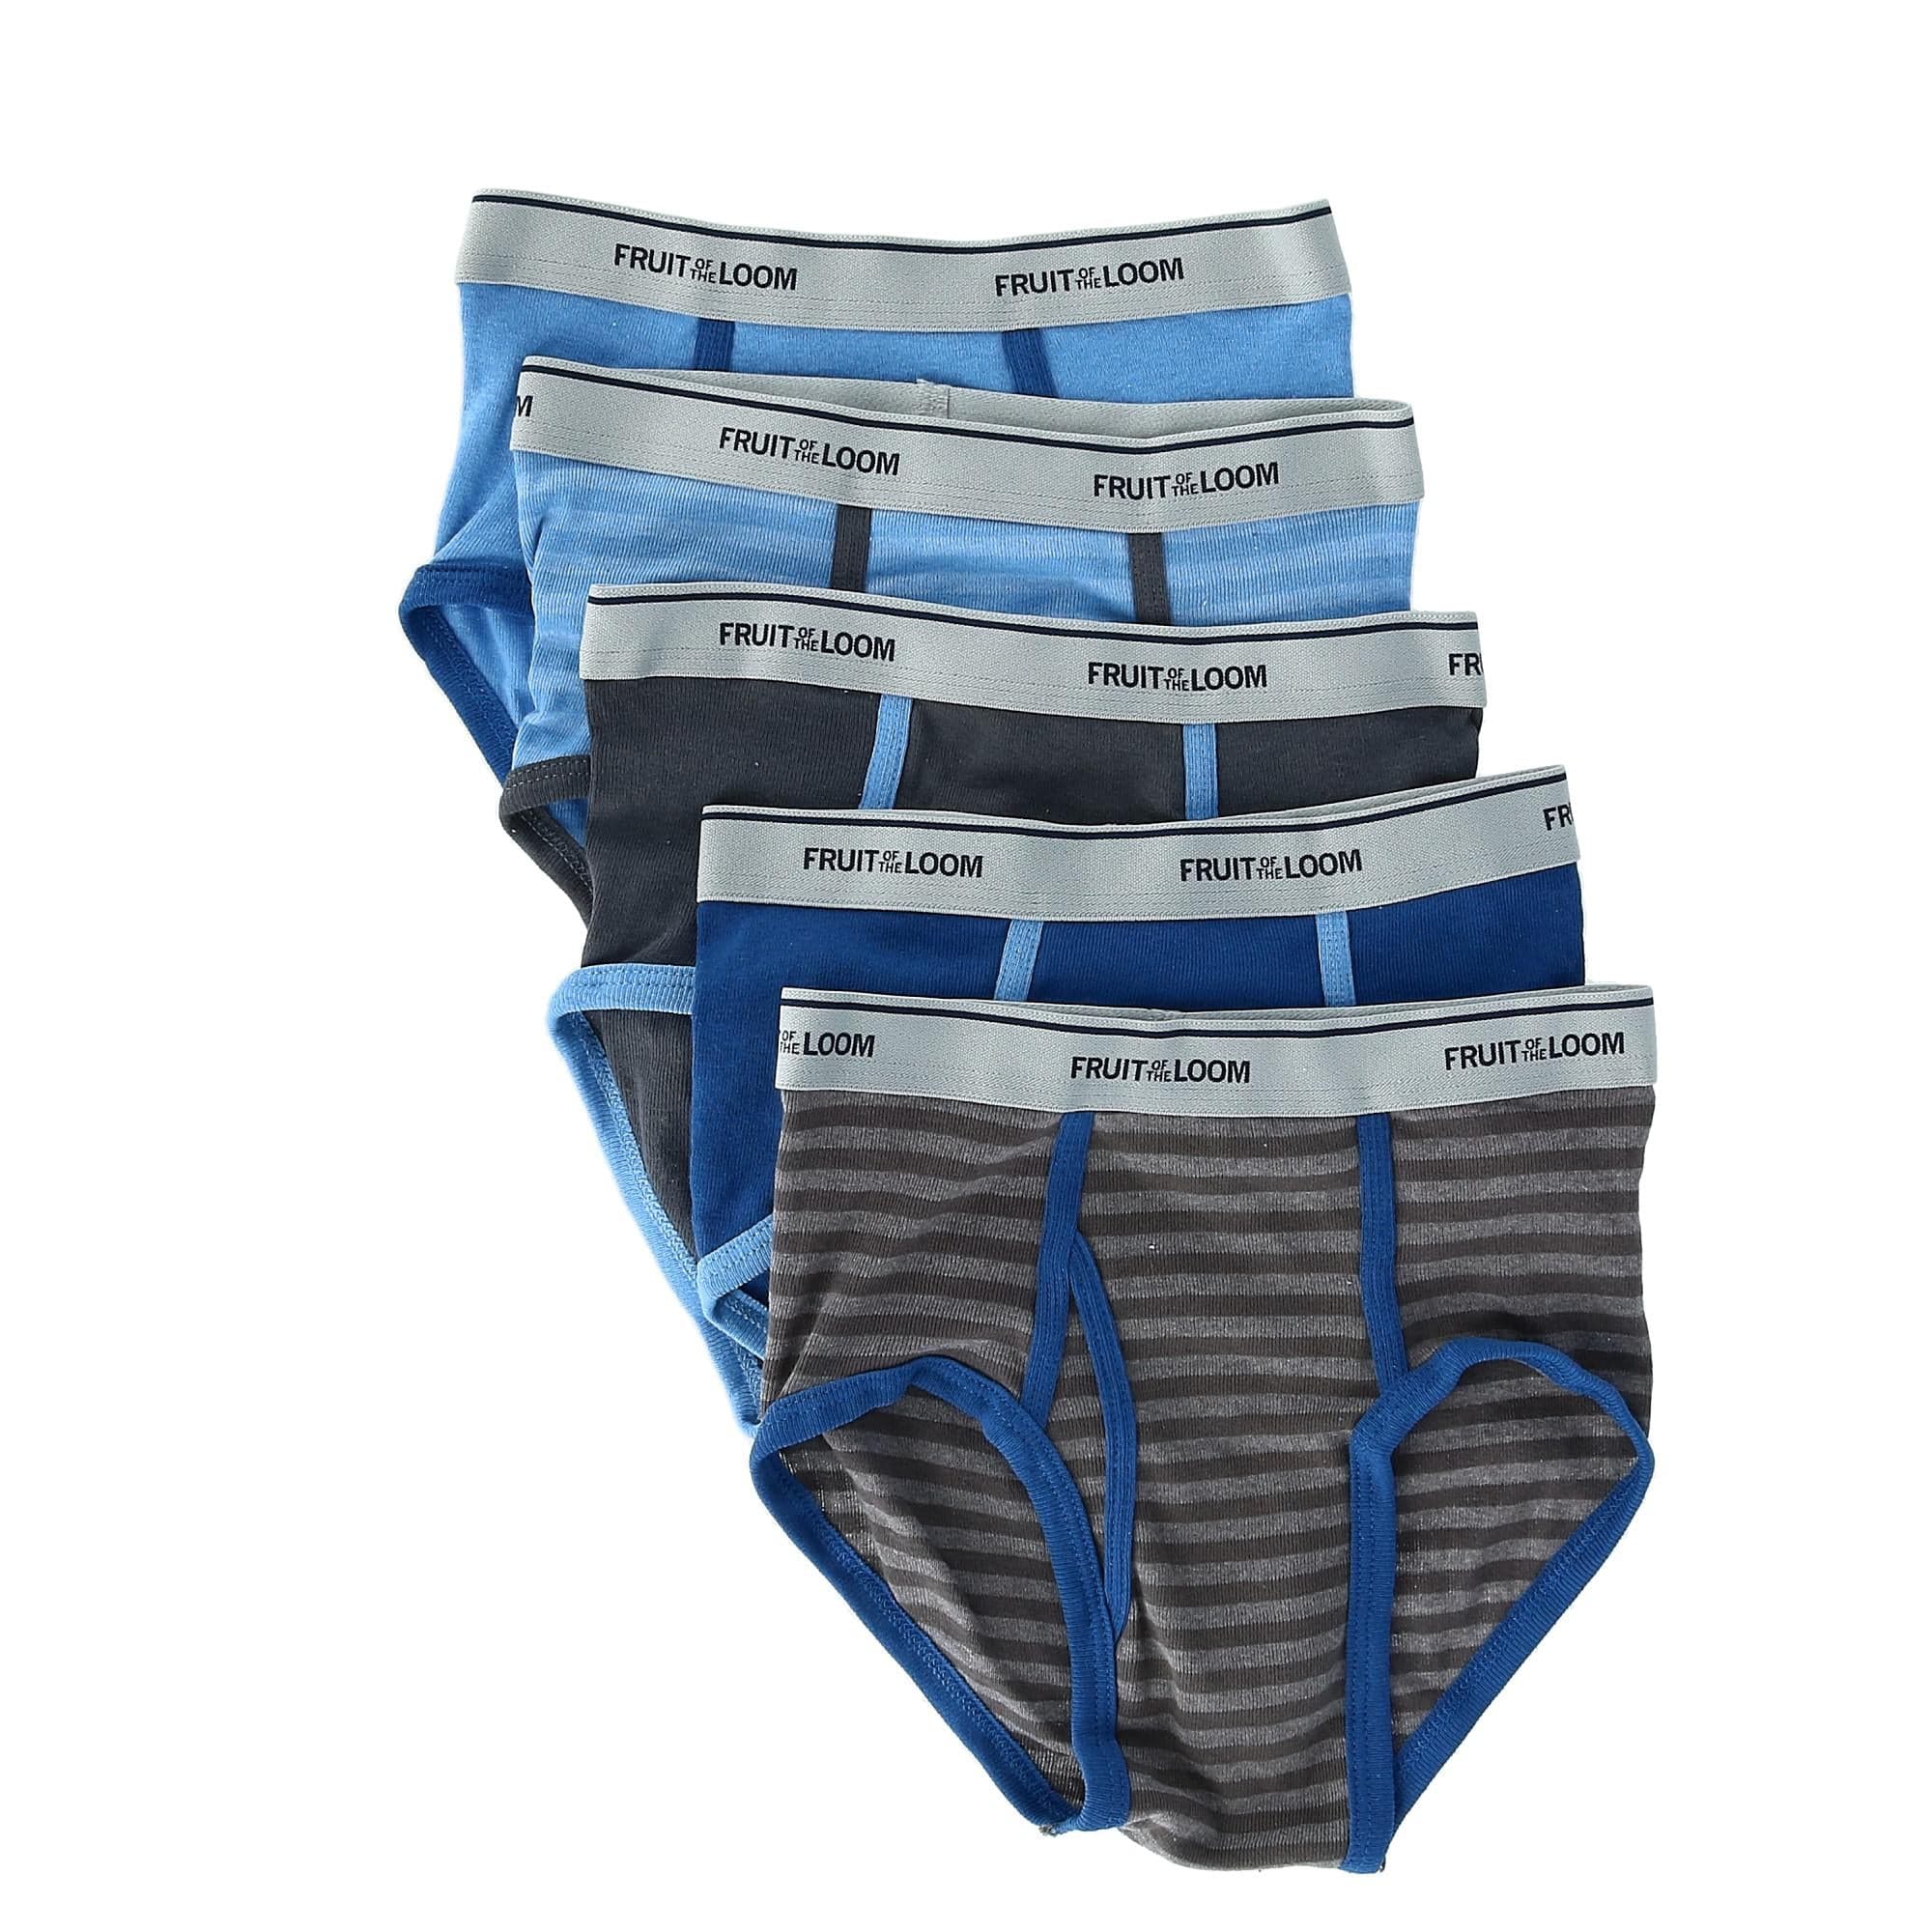 Toddler Boys Days of the Week Briefs Underwear (7 Pair Pack) by Fruit of the  Loom